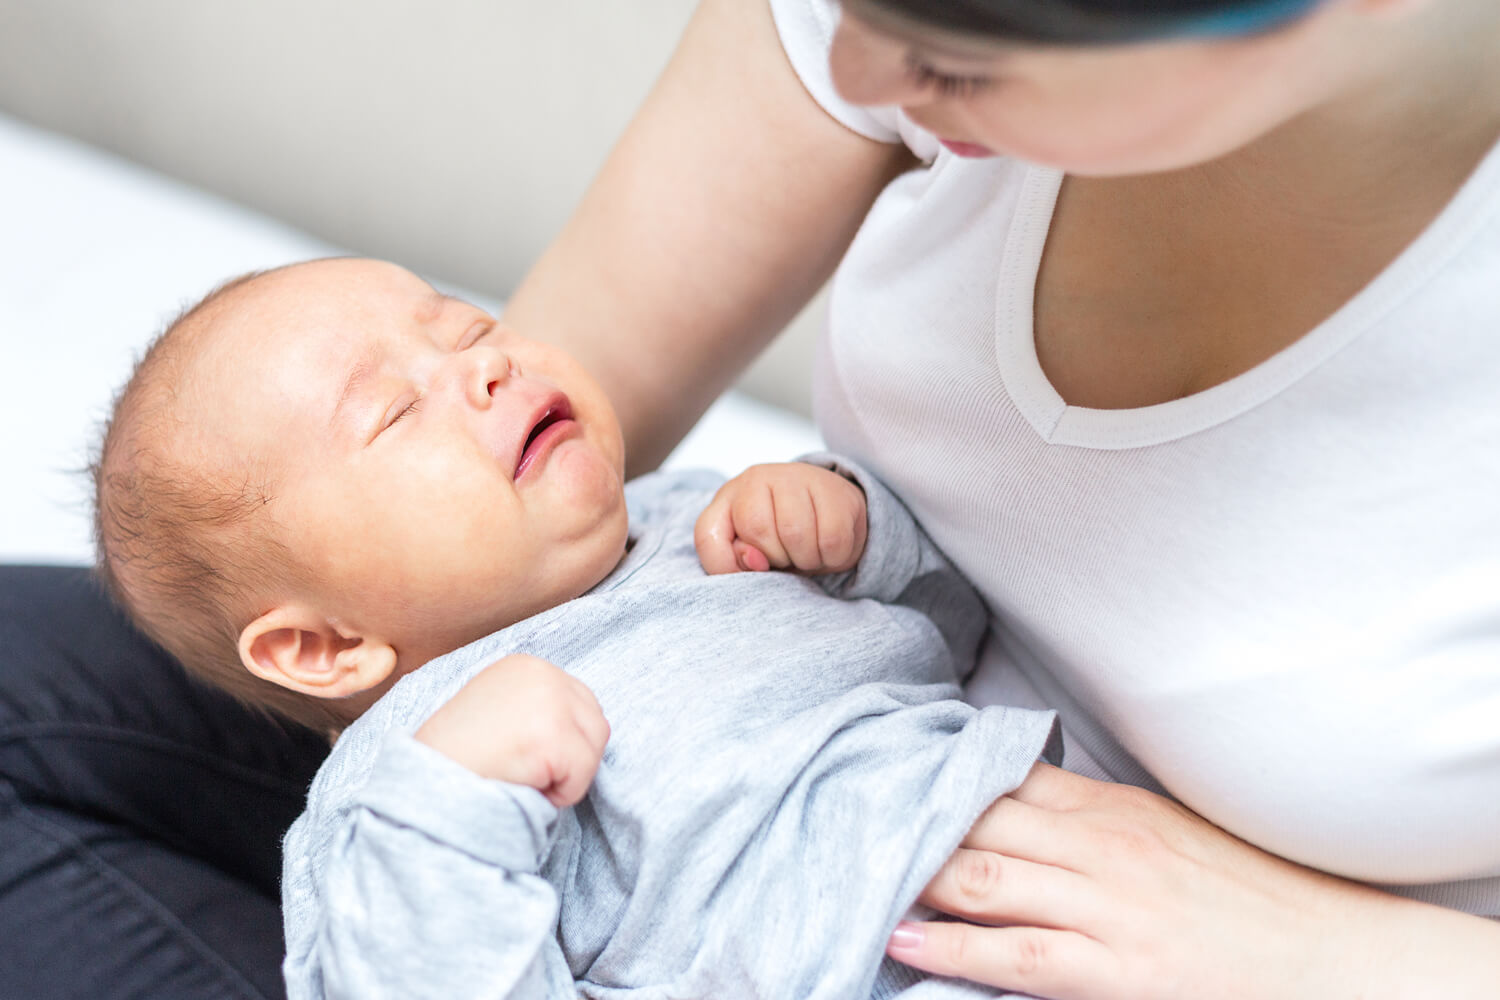 Foods That Can Cause Colic in Breastfed Babies 